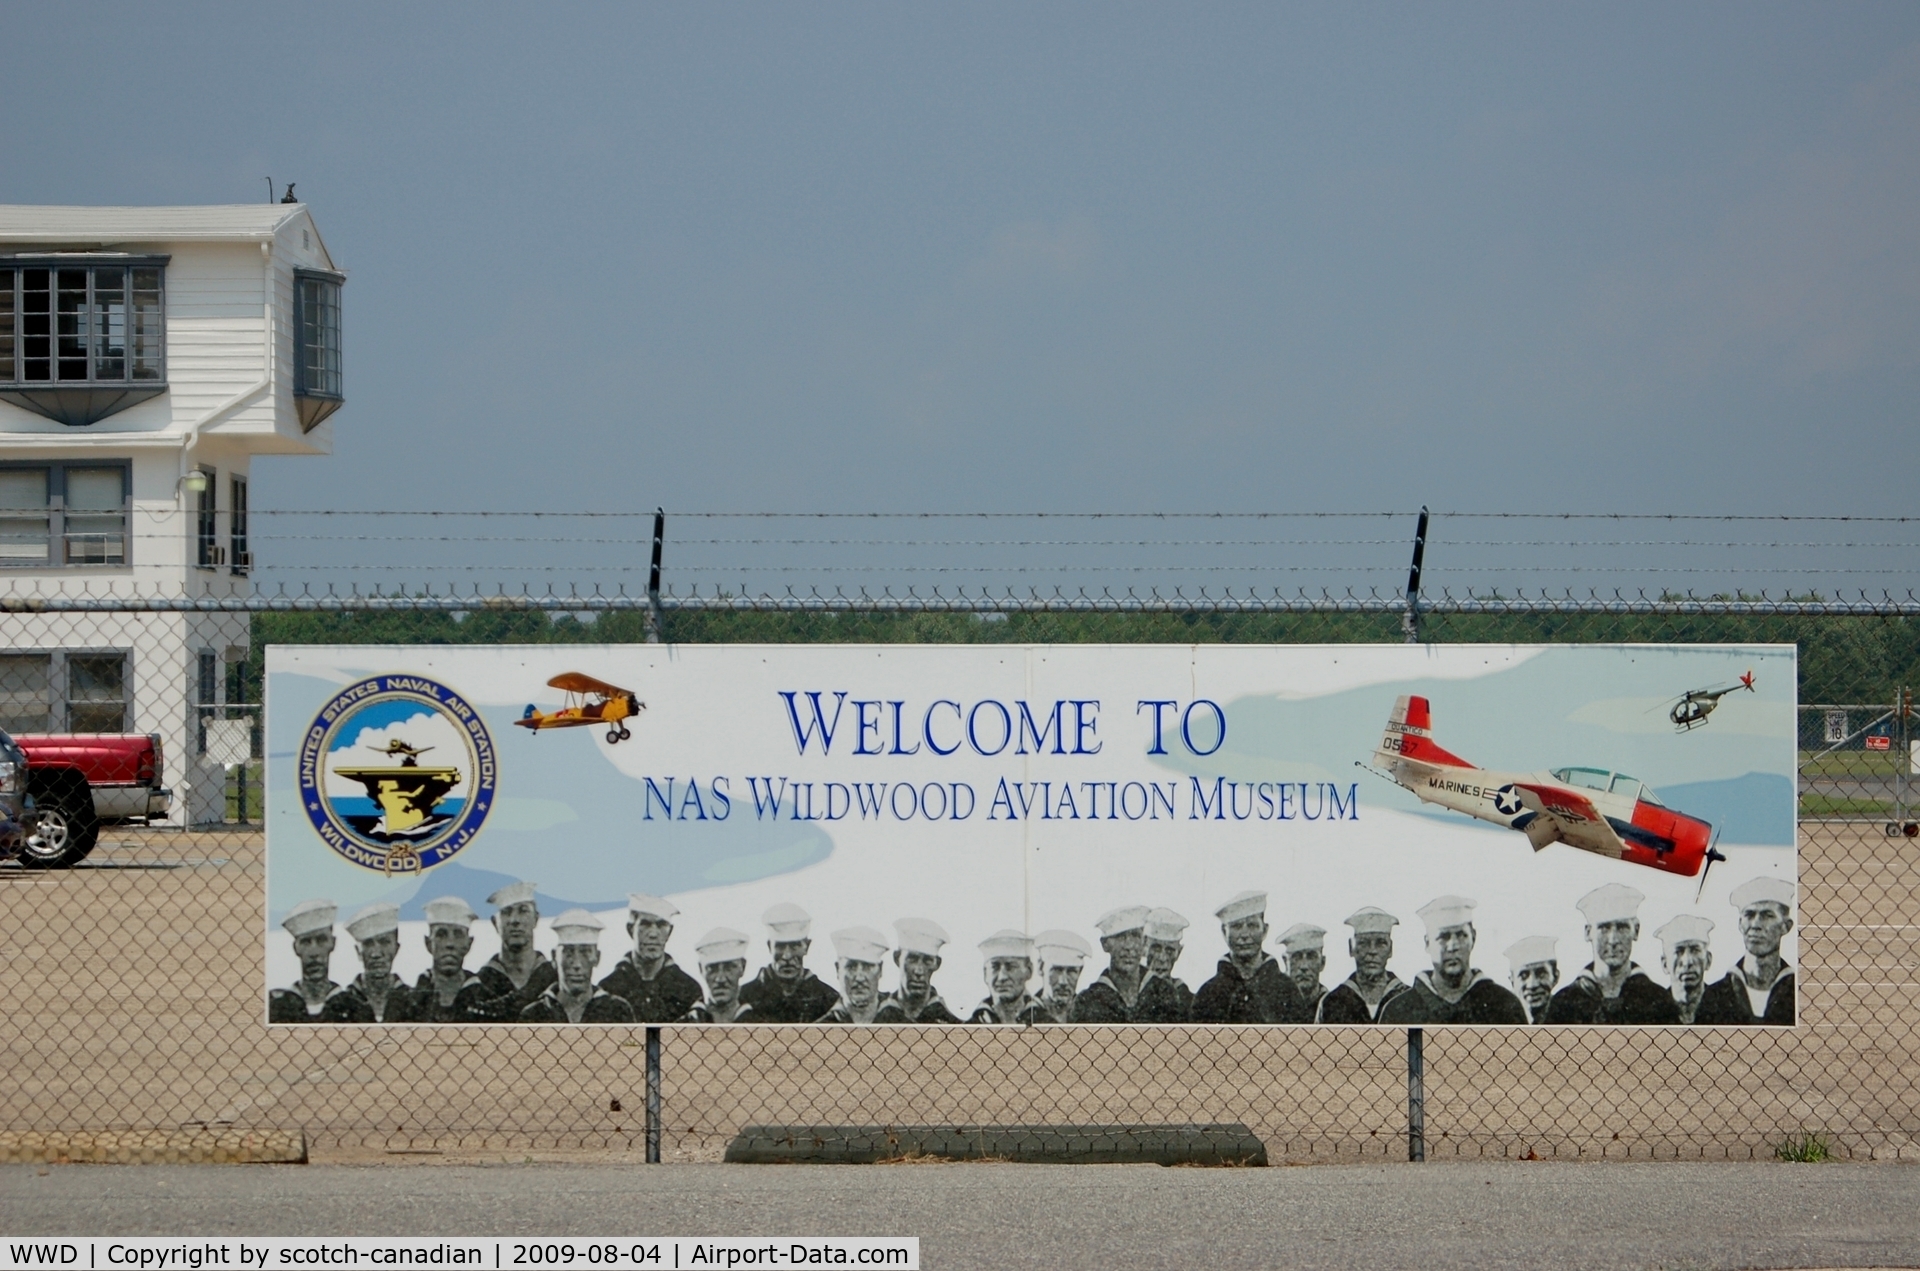 Cape May County Airport (WWD) - Welcome Sign at the Naval Air Station Wildwood Aviation Museum, Cape May County Airport, Wildwood, NJ